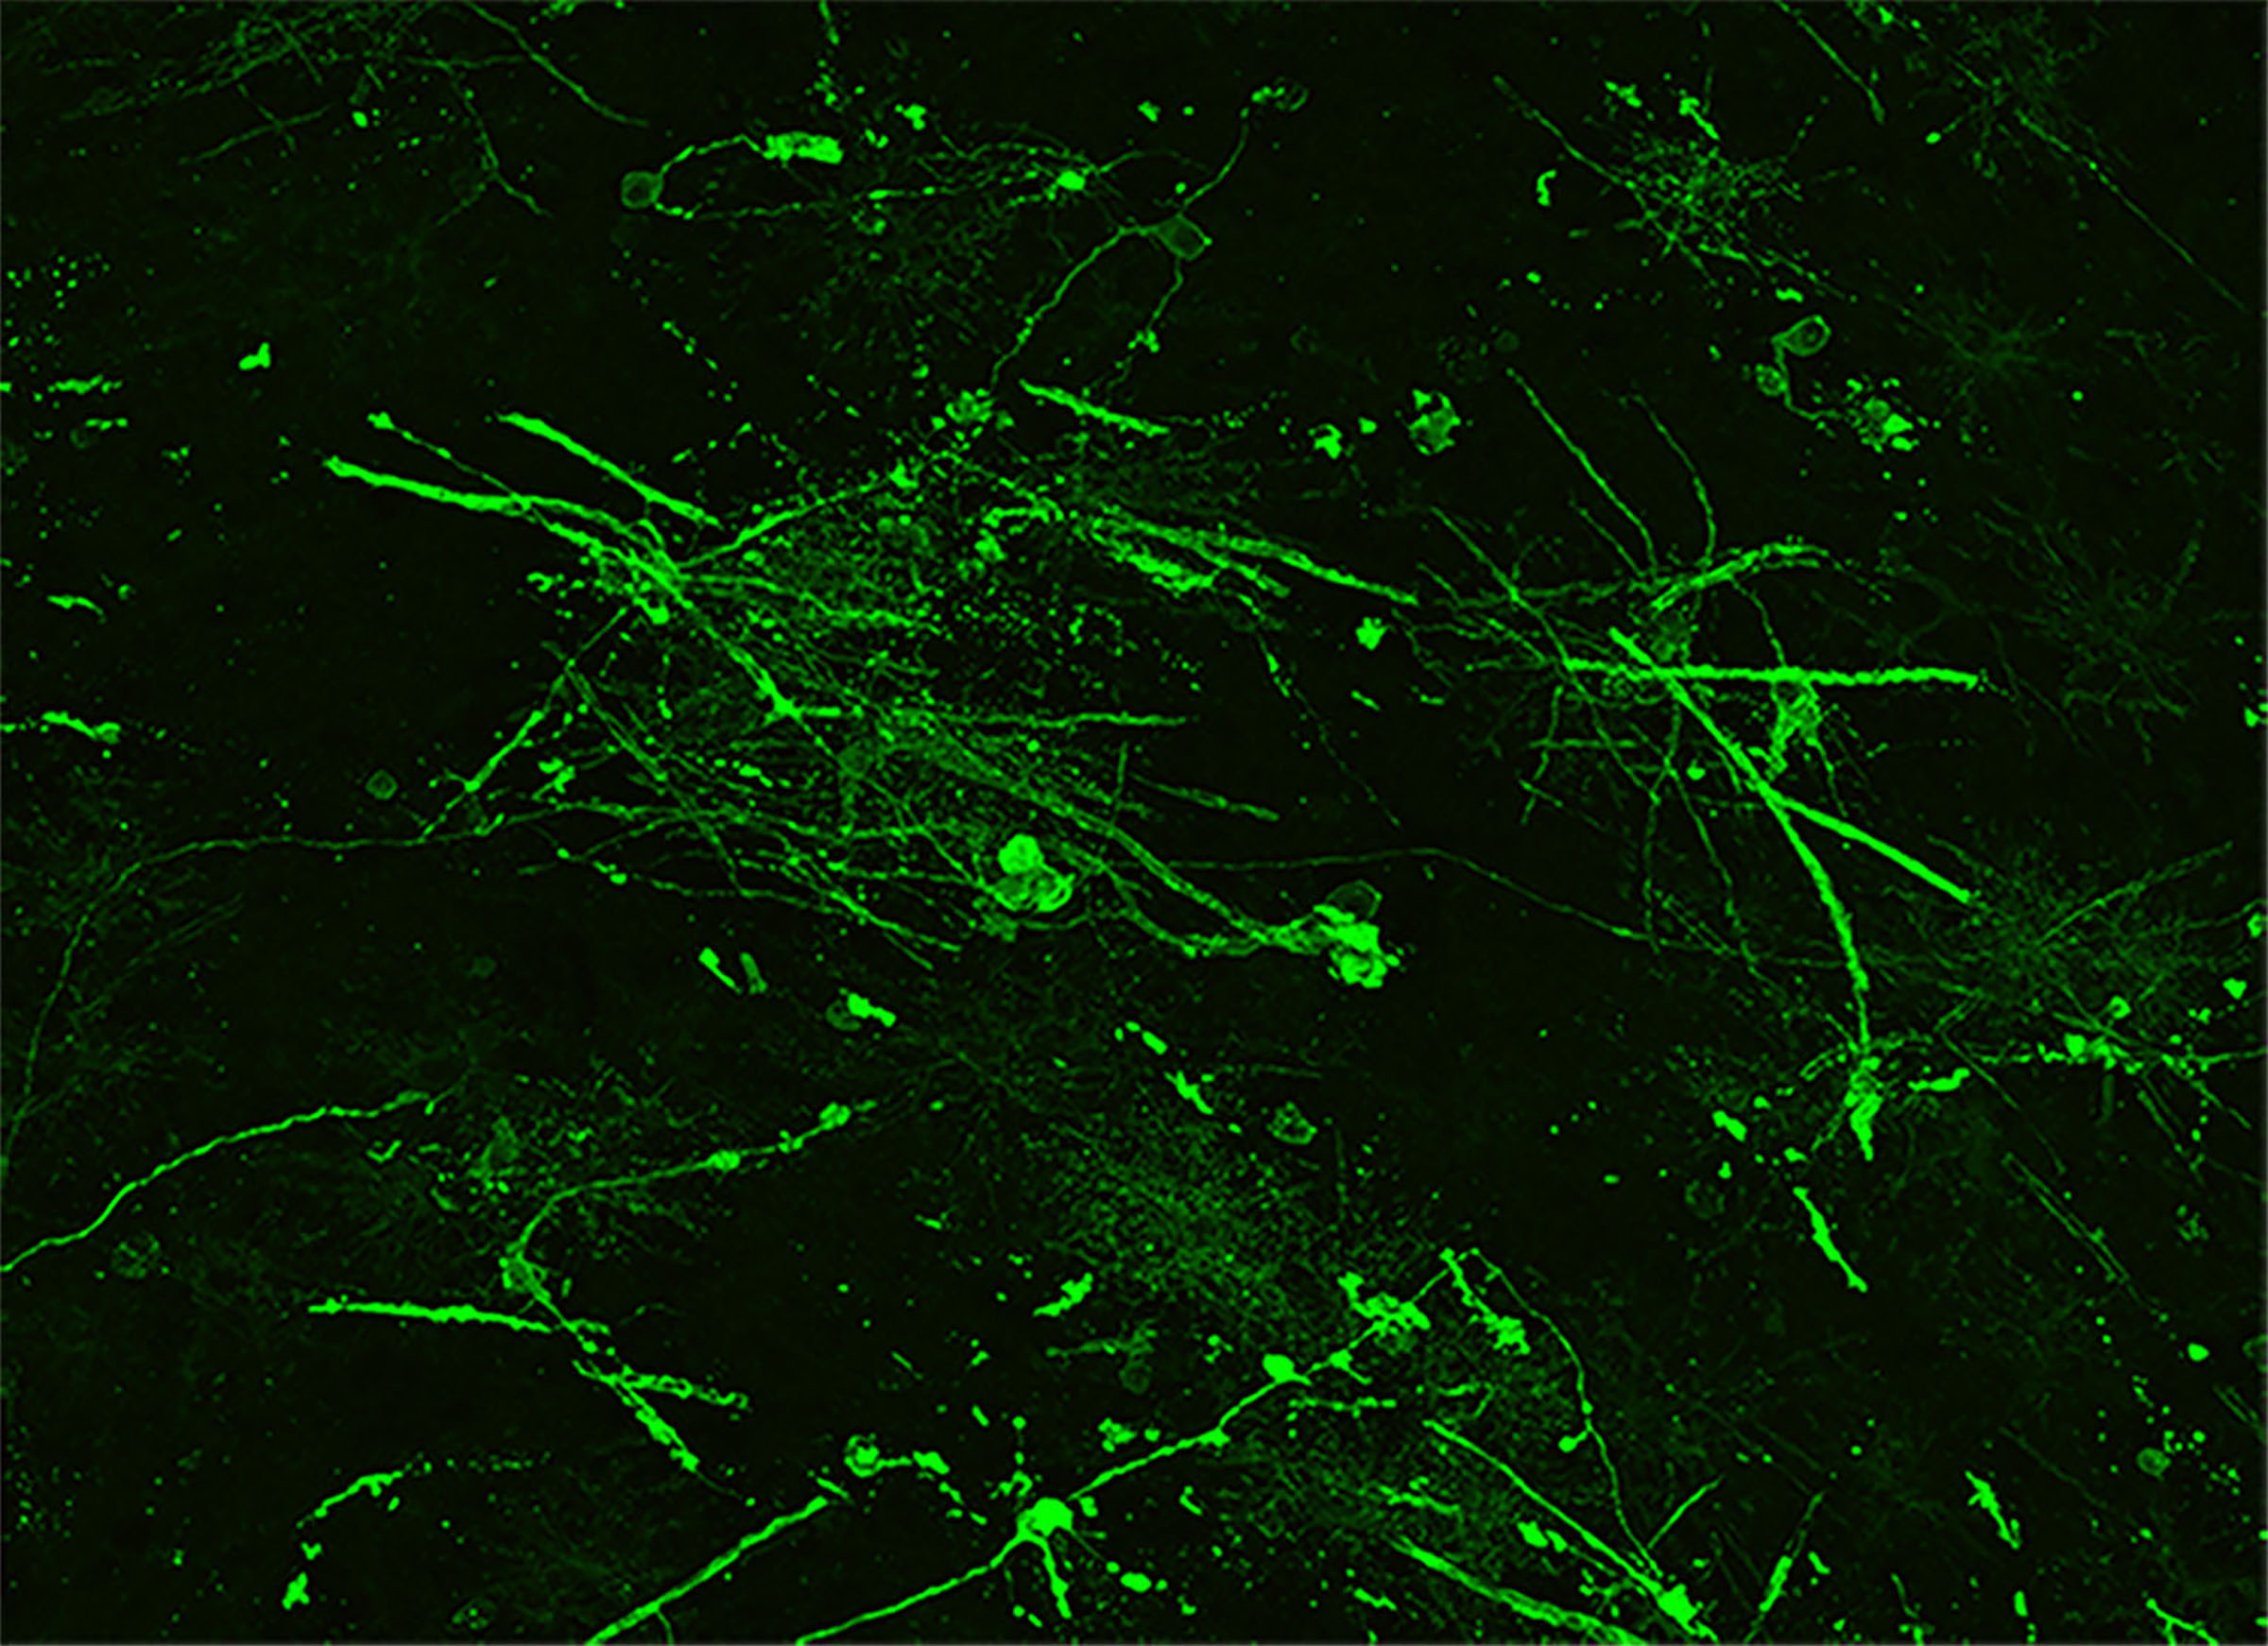 Bright green strands show how human brain cell organoids responded to treatment to enhance myelination.